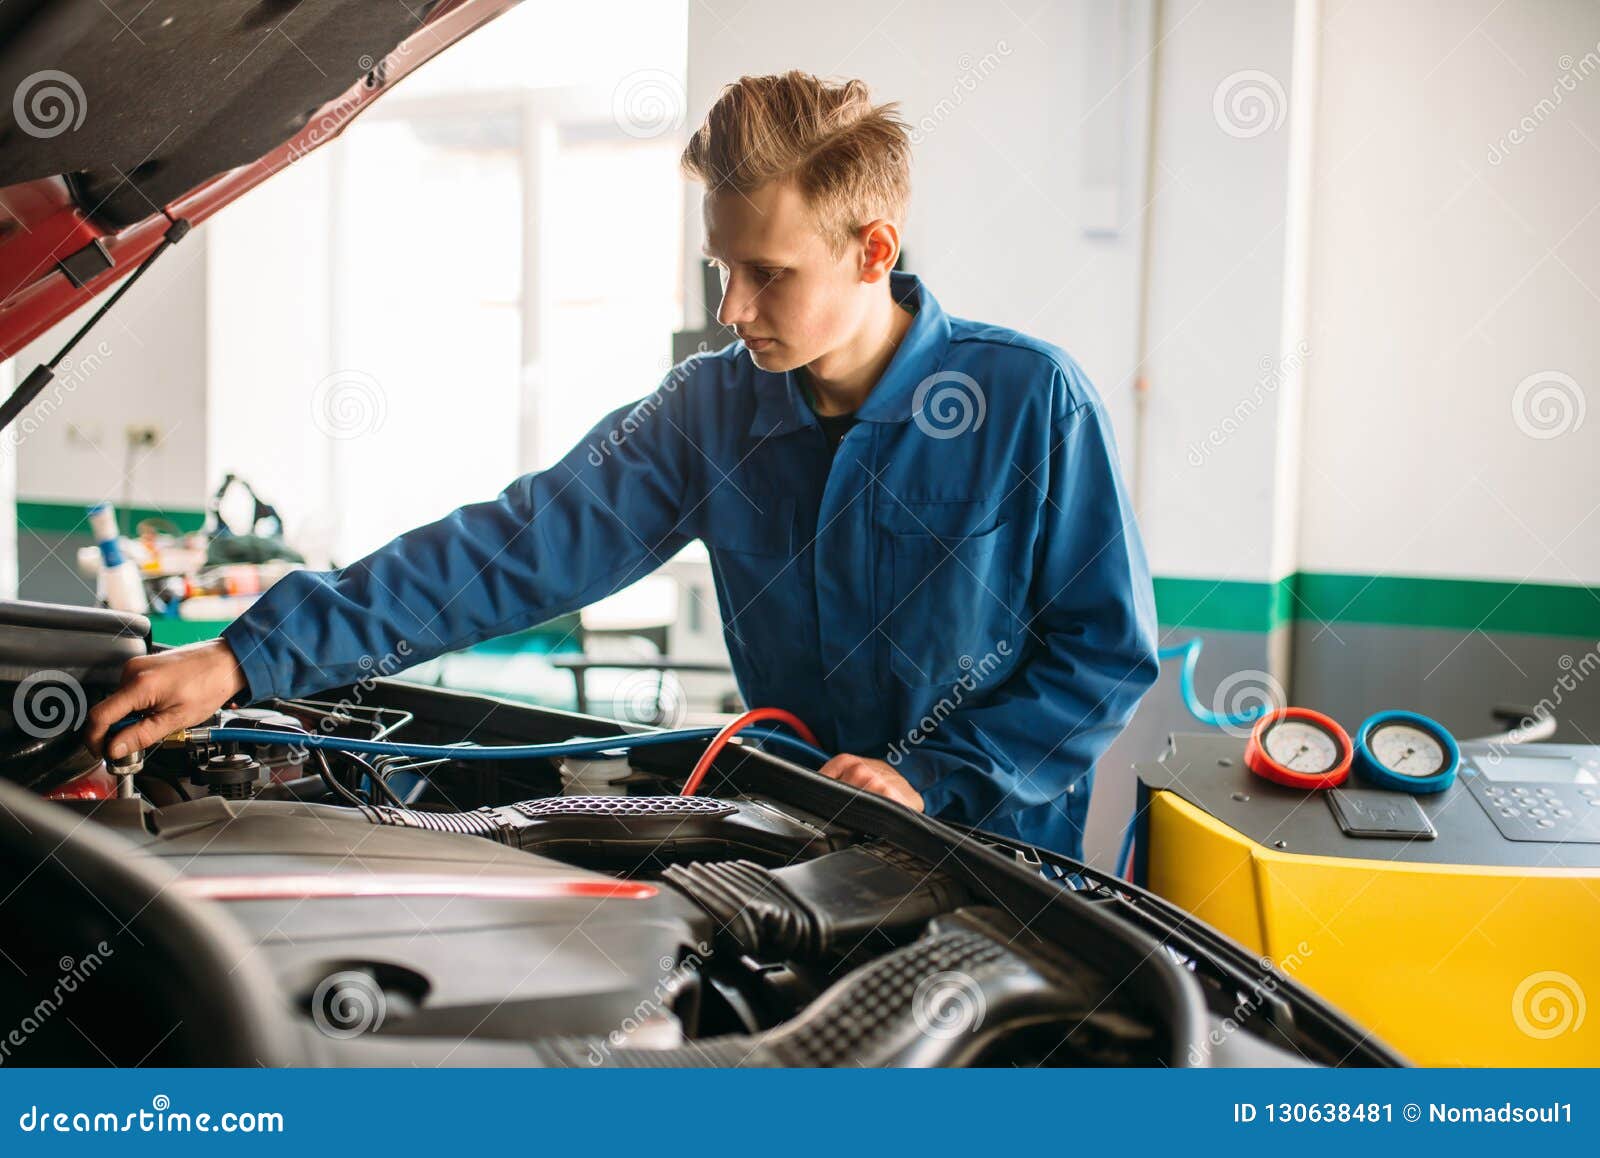 Mechanic Connects Air Conditioning System Stock Image - Image of